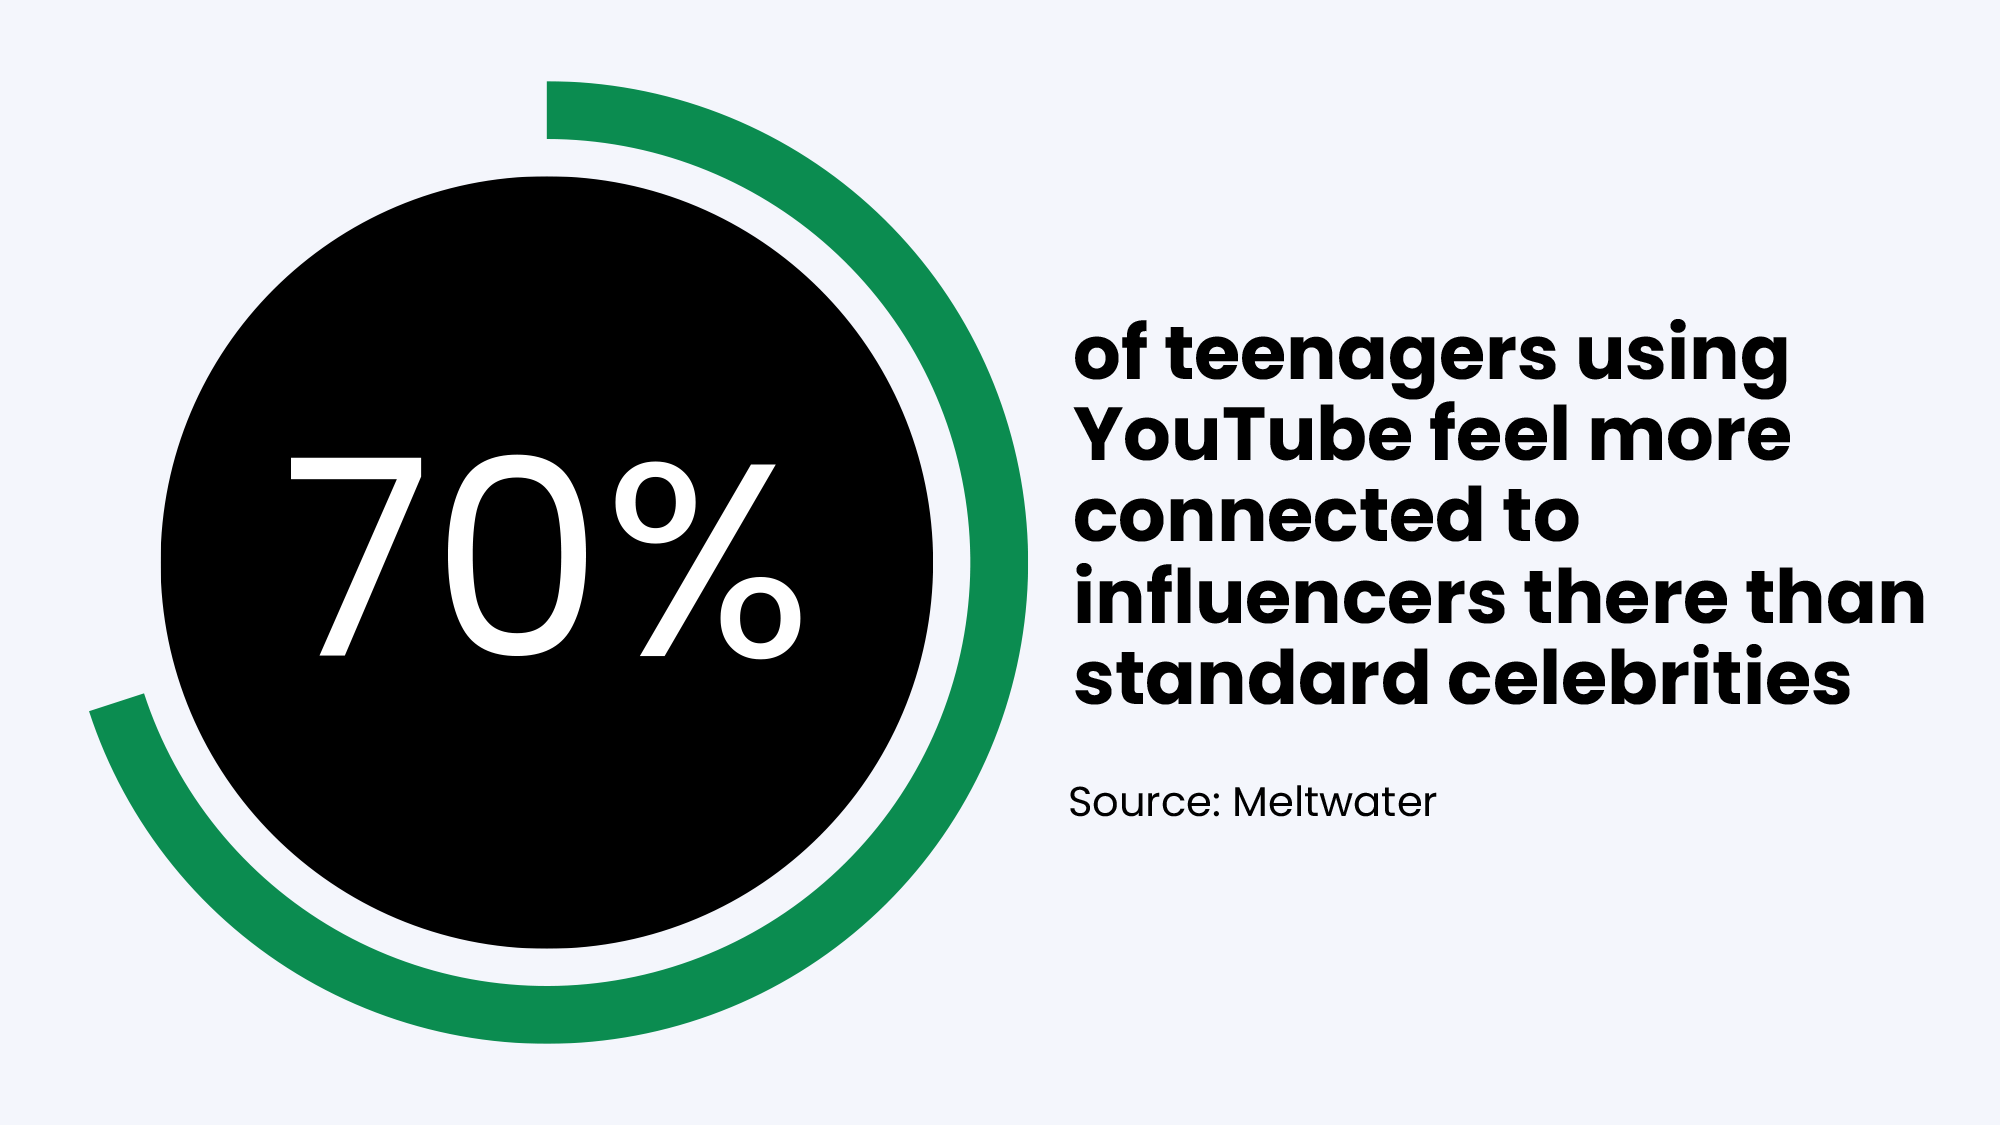 70% of teenagers using YouTube feel more connected to influencers there than standard celebrities